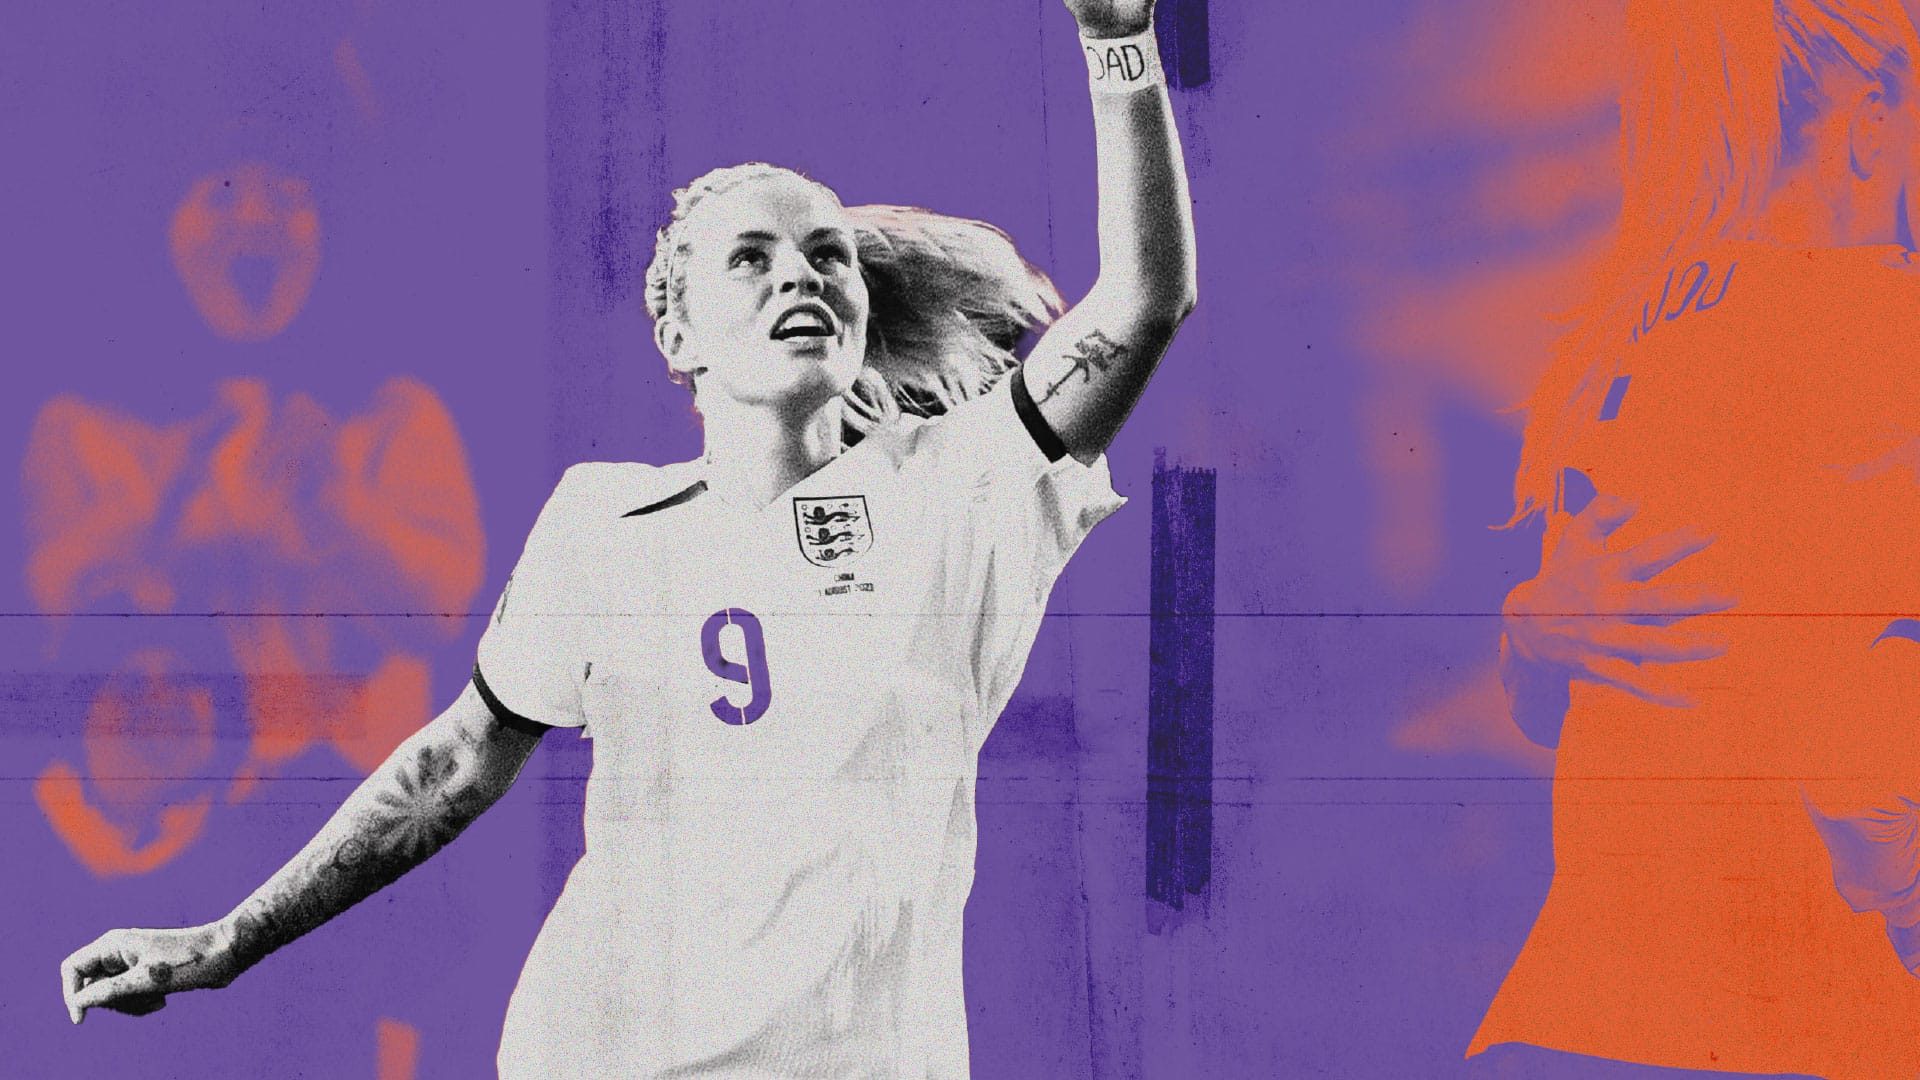 Rachel Daly celebrating a goal against the 31/7 purple and orange colours